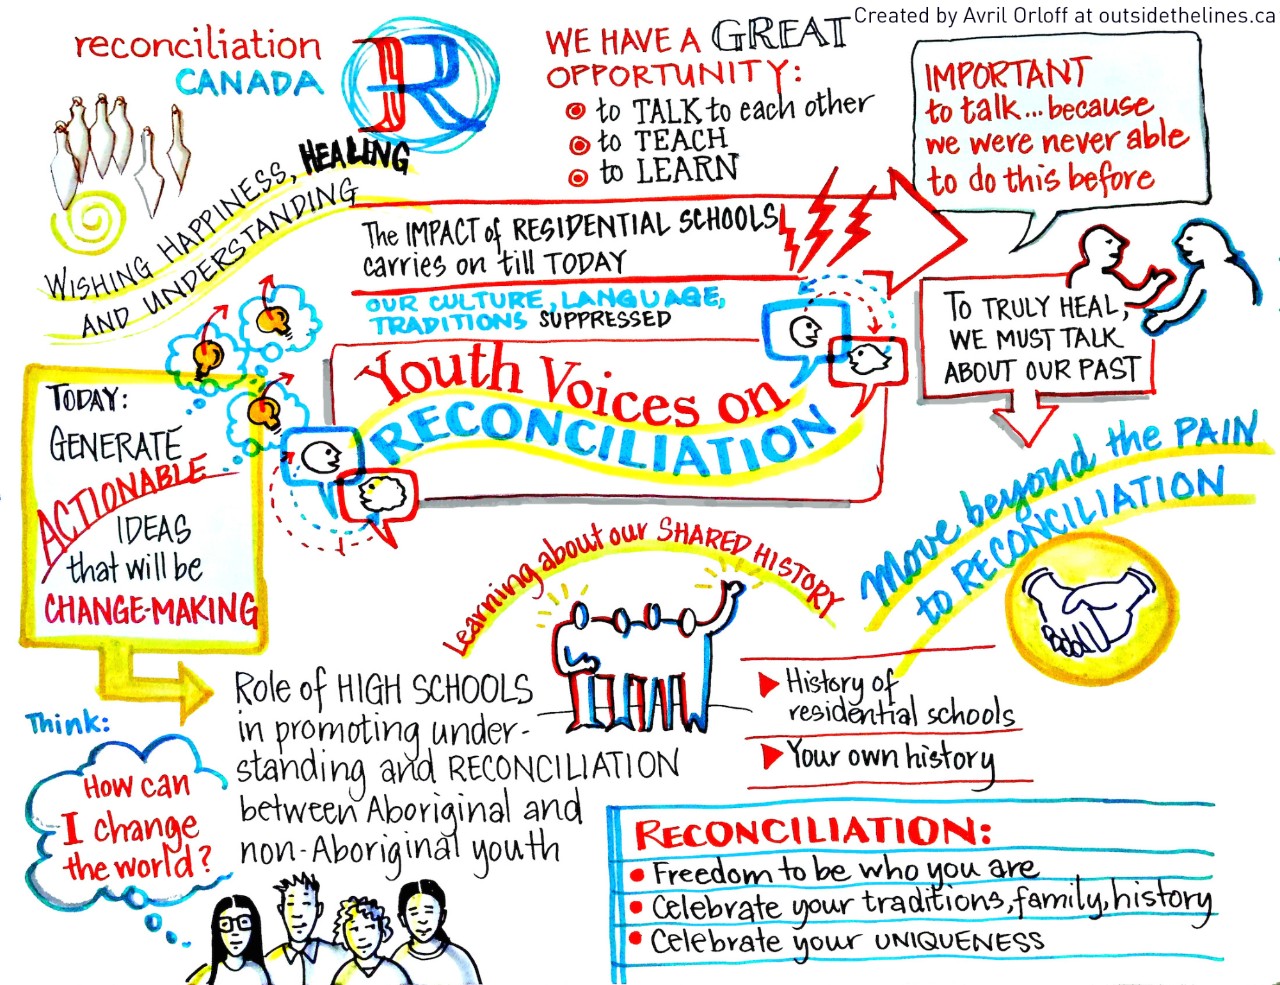 Graphic recording illustration of the Youth Voices on Reconciliation event by Avril Orloff